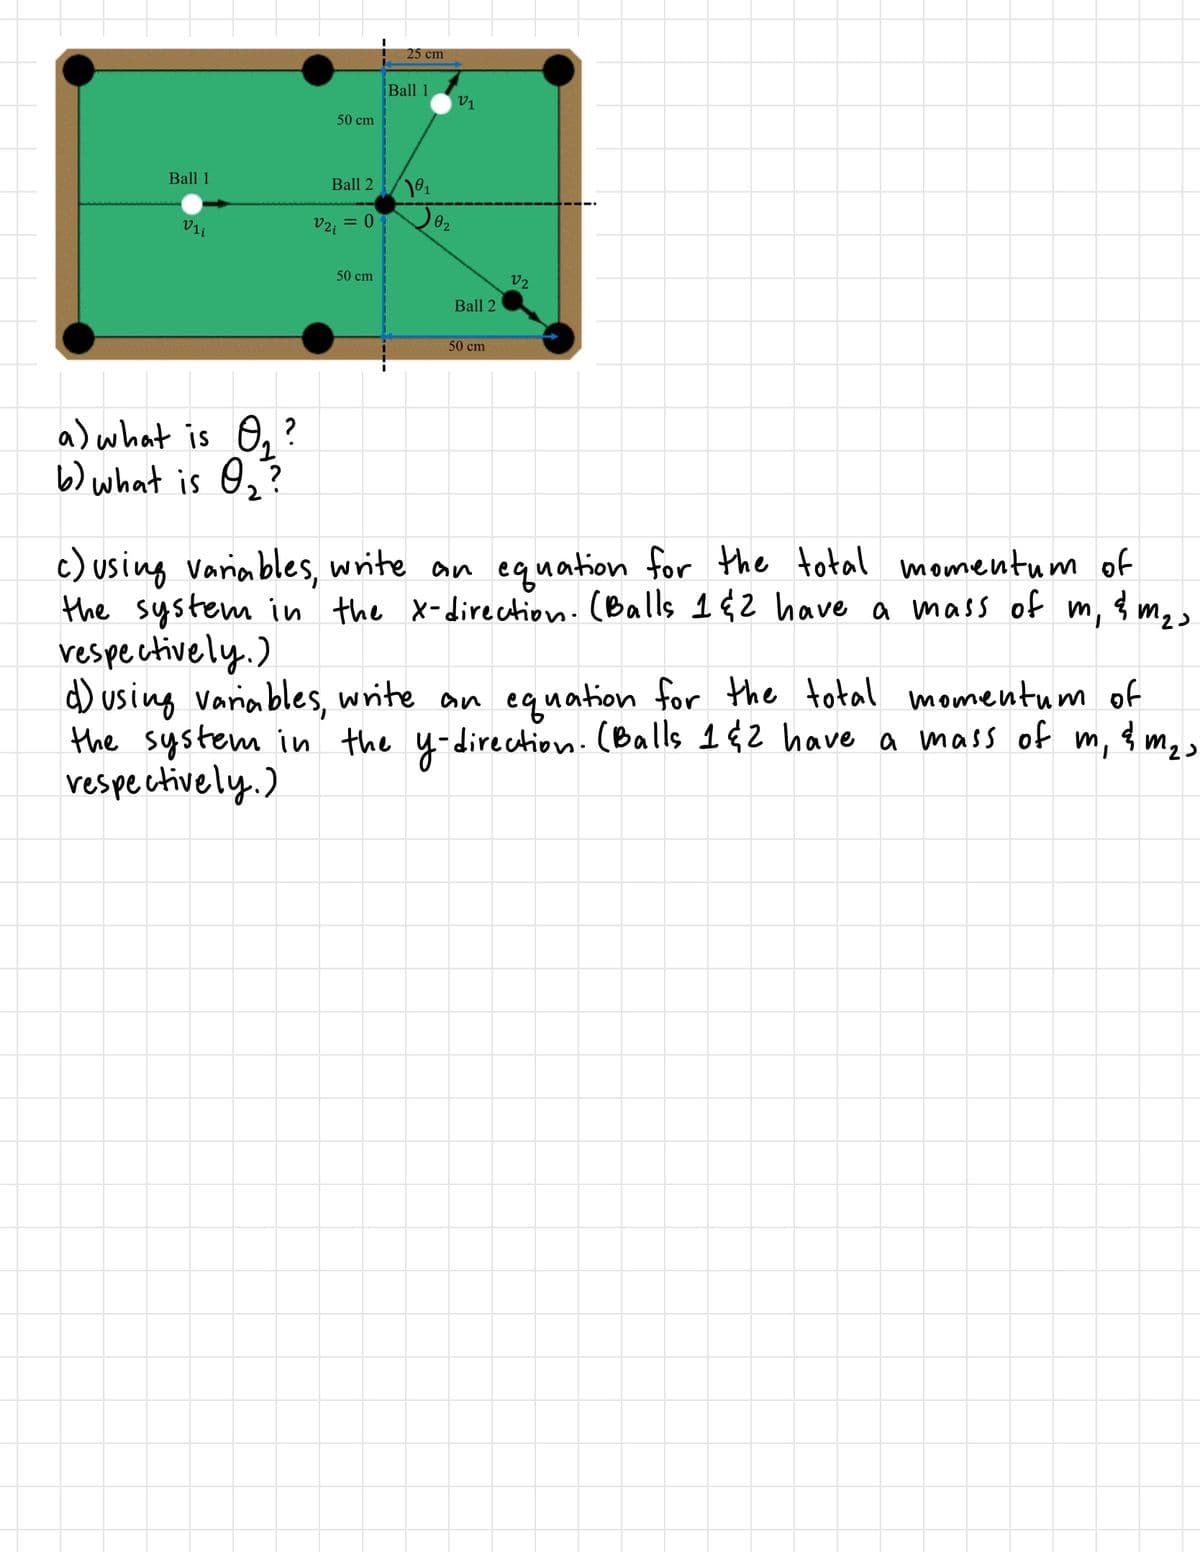 25 сm
Ball 1
V1
50 cm
Ball 1
Ball 2
02
Vi
V2; = 0
50 cm
v2
Ball 2
50 cm
a) what is O, ?
b) what is O2?
c) using variables, write an equation for the total momentum of
the system in the x-direction.(Balls 1¢2 have a mass of m,
vespectively.)
d) using variables, write an equation for the total momentum of
the system in the y-direction.(Balls 142 have a mass of m, { m2>
vespectively.)
